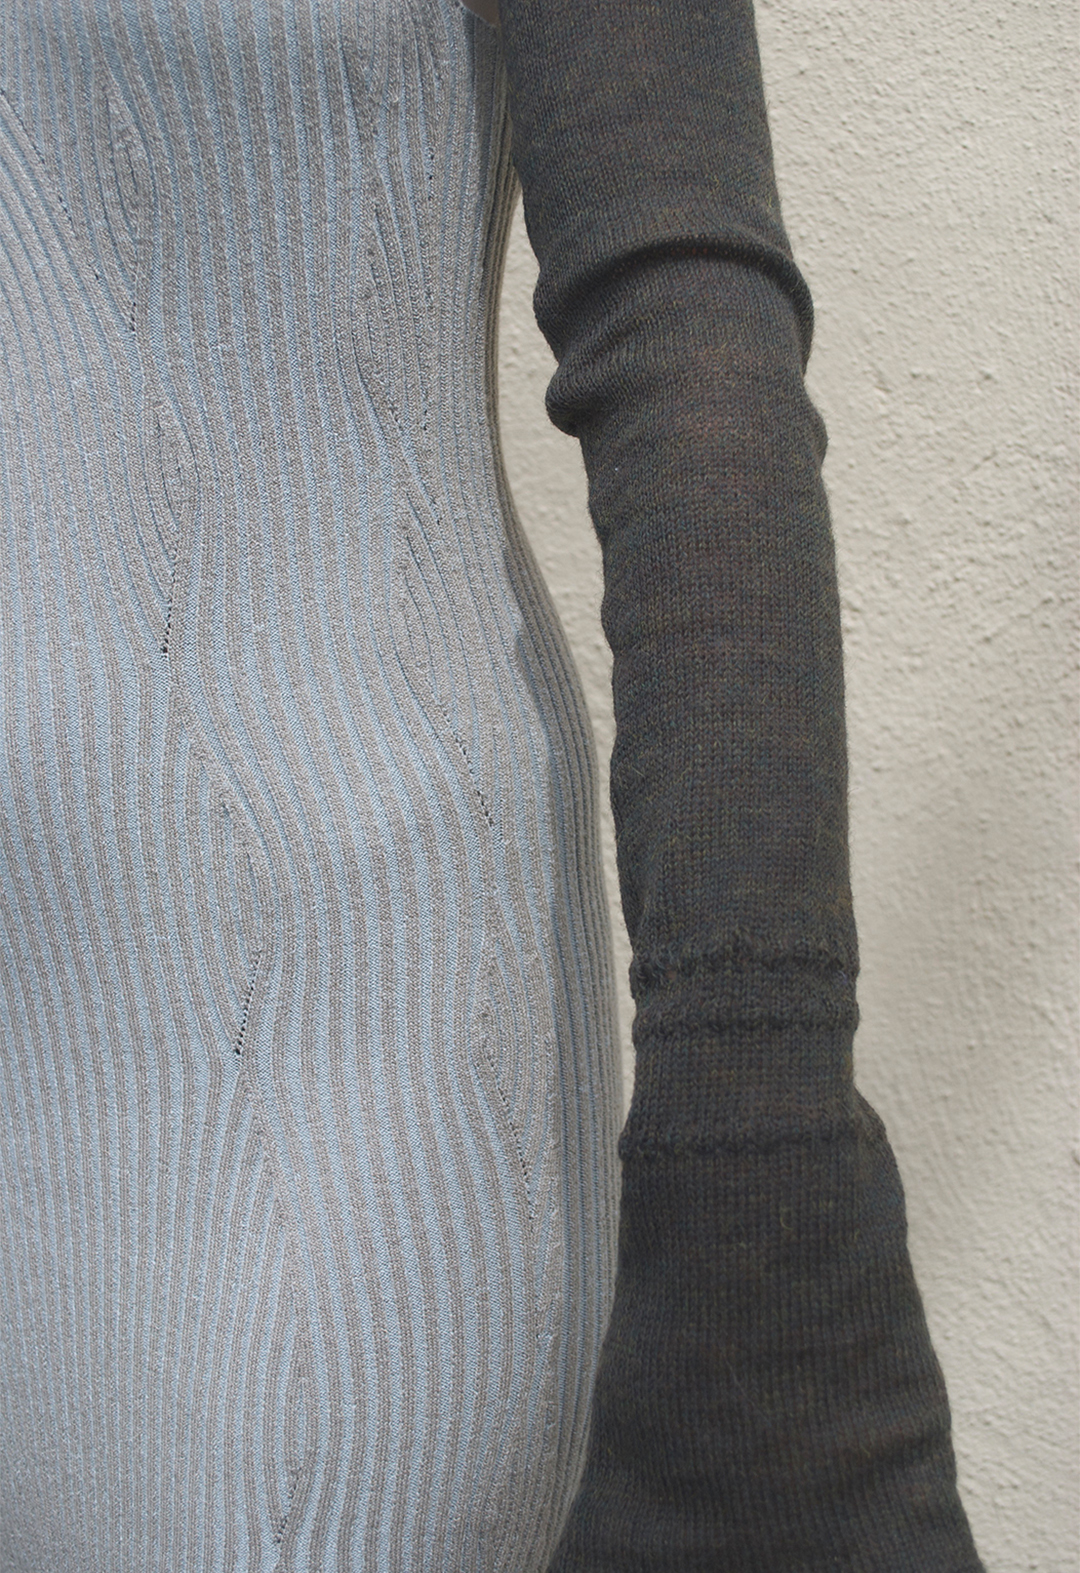 The photo shows a close-up detail shot of the shrug sleeve.